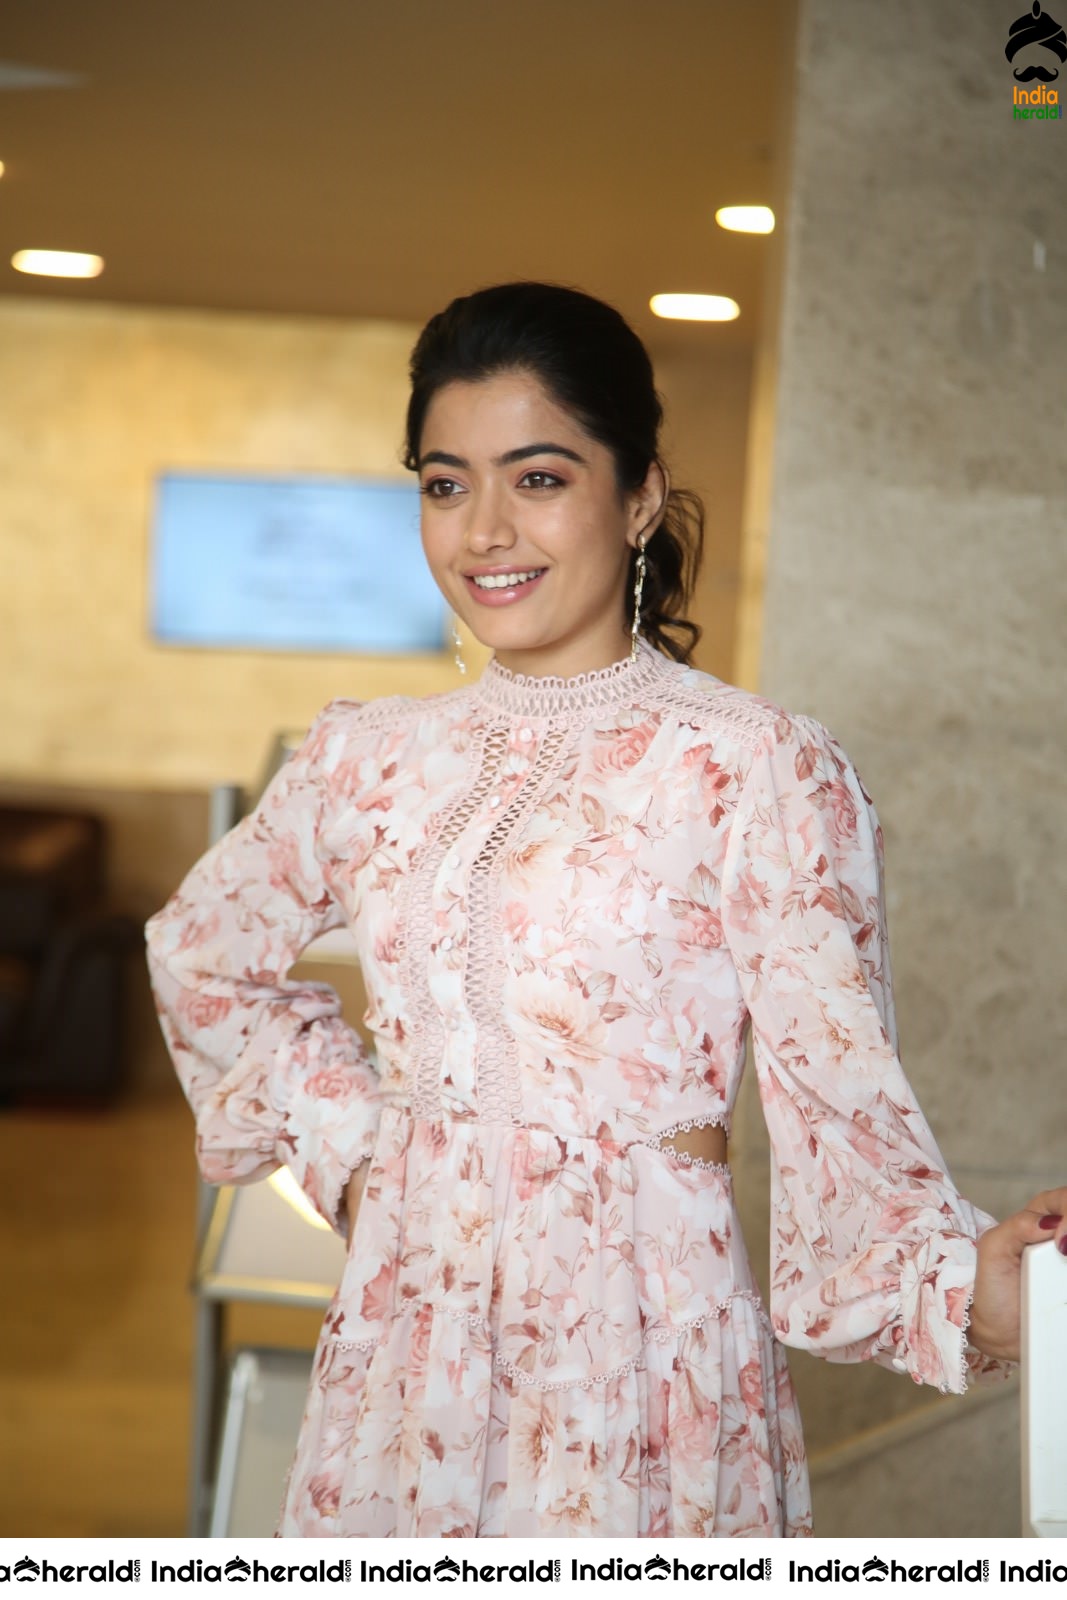 Rashmika Mandanna is just too pretty to handle in these photos